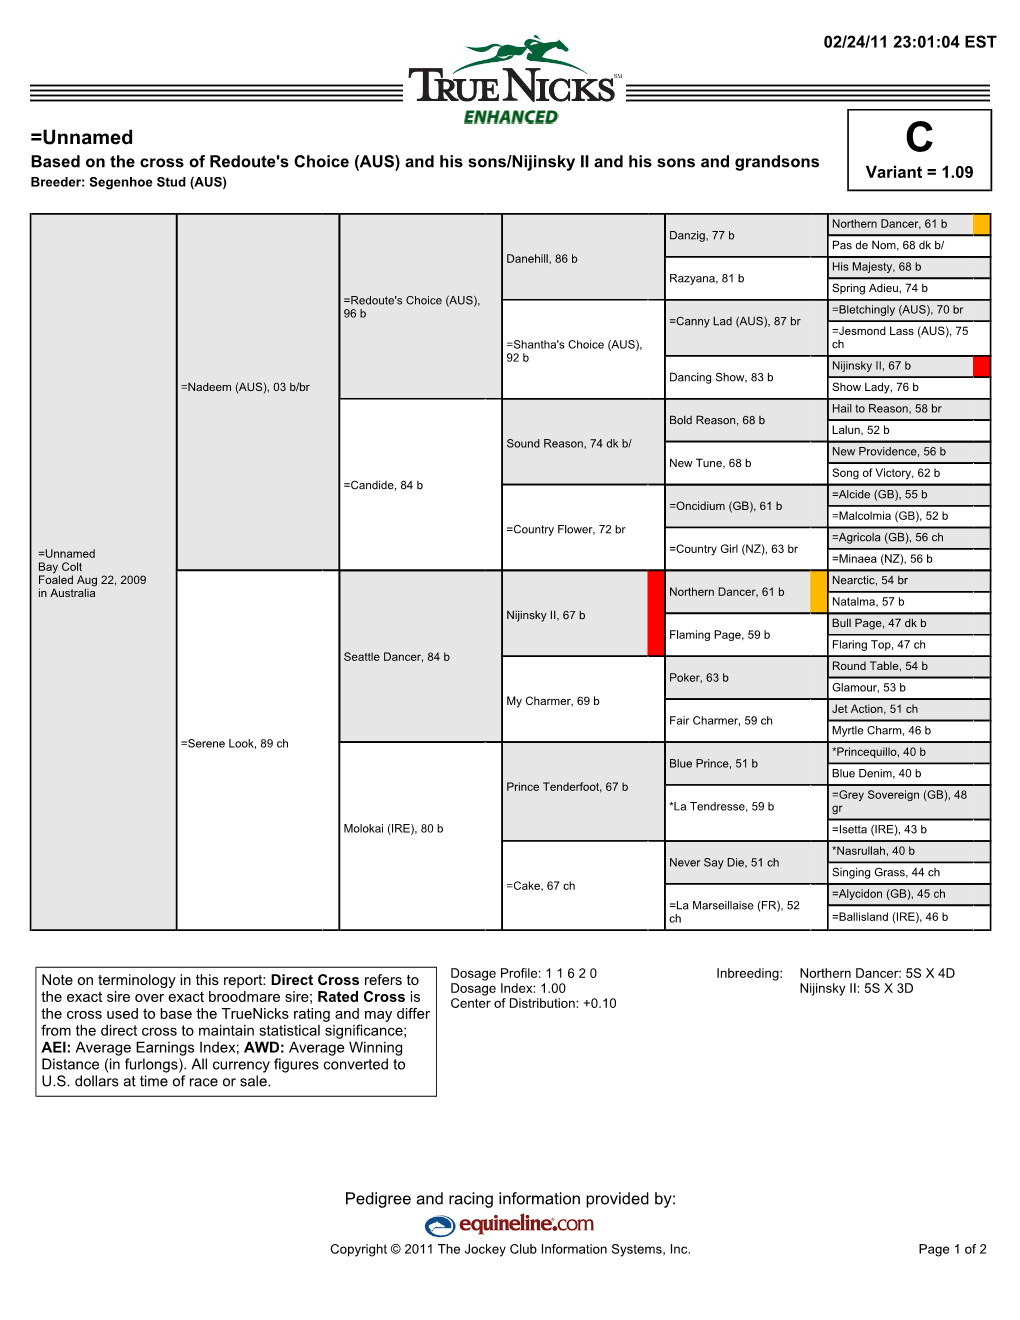 =Unnamed C Based on the Cross of Redoute's Choice (AUS) and His Sons/Nijinsky II and His Sons and Grandsons Variant = 1.09 Breeder: Segenhoe Stud (AUS)